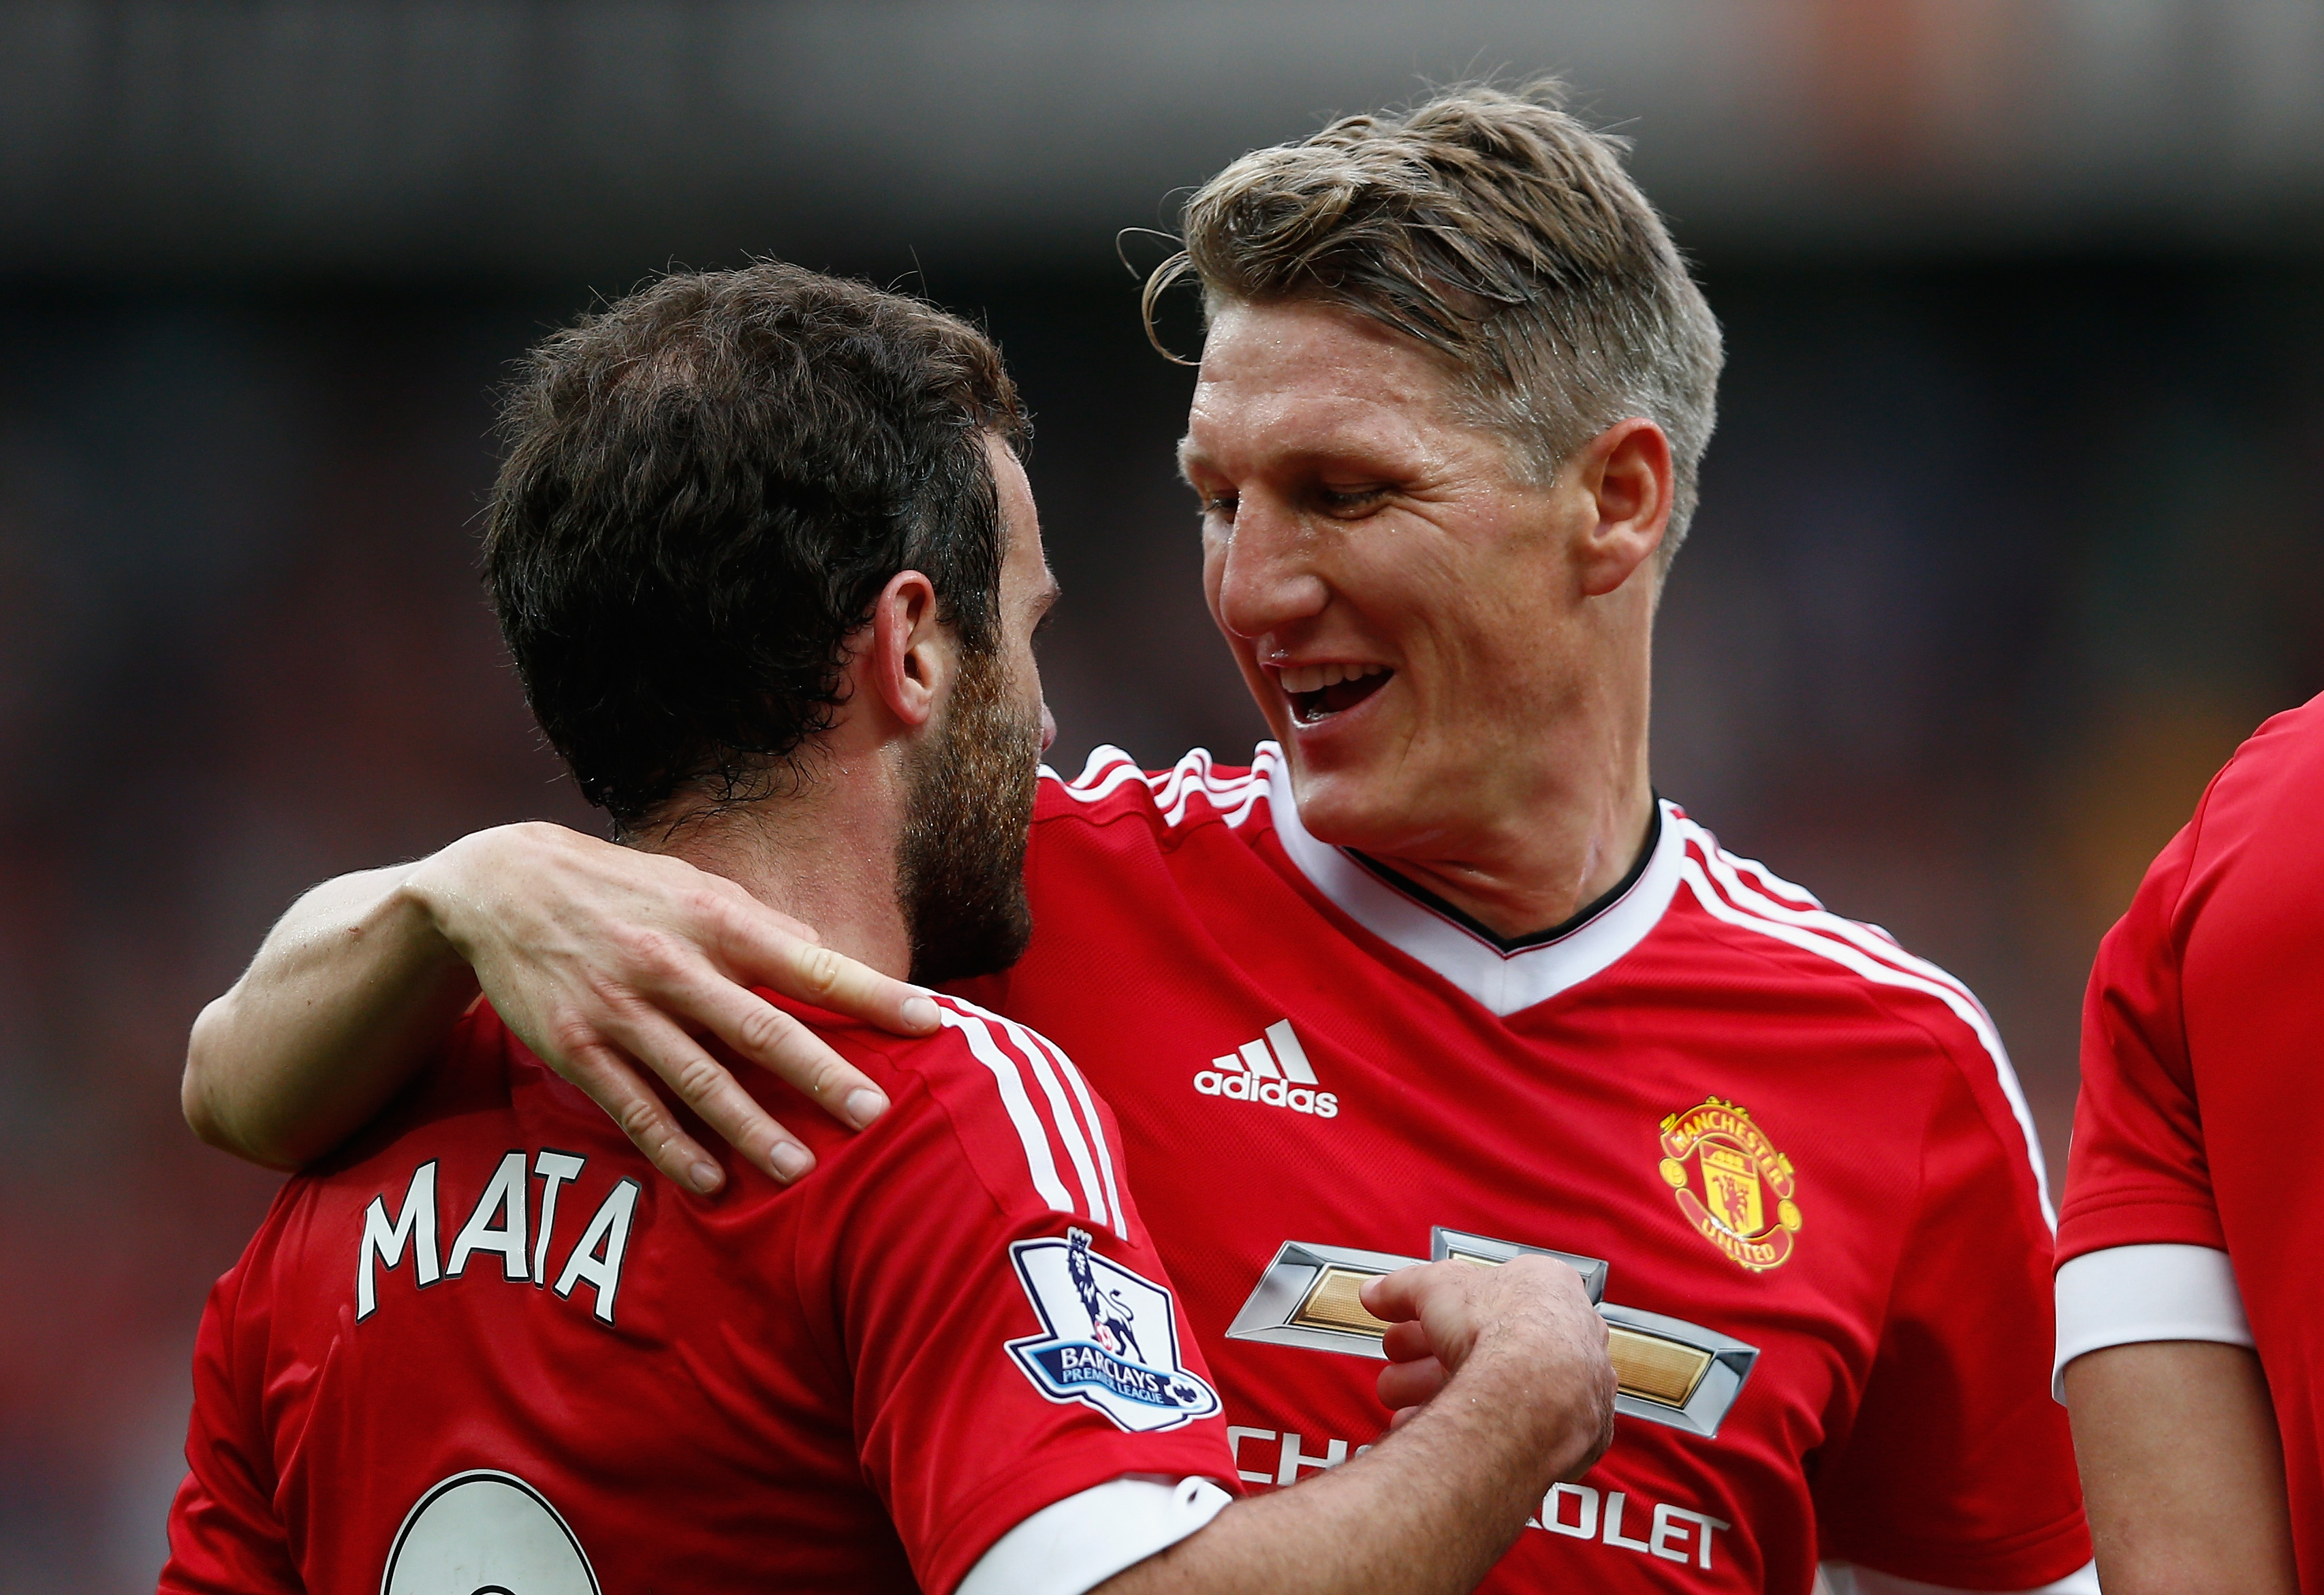 MANCHESTER, ENGLAND - SEPTEMBER 26:  Juan Mata (L) of Manchester United celebrates scoring his team's third goal with his team mate Bastian Schweinsteiger (R) during the Barclays Premier League match between Manchester United and Sunderland at Old Trafford on September 26, 2015 in Manchester, United Kingdom.  (Photo by Dean Mouhtaropoulos/Getty Images)